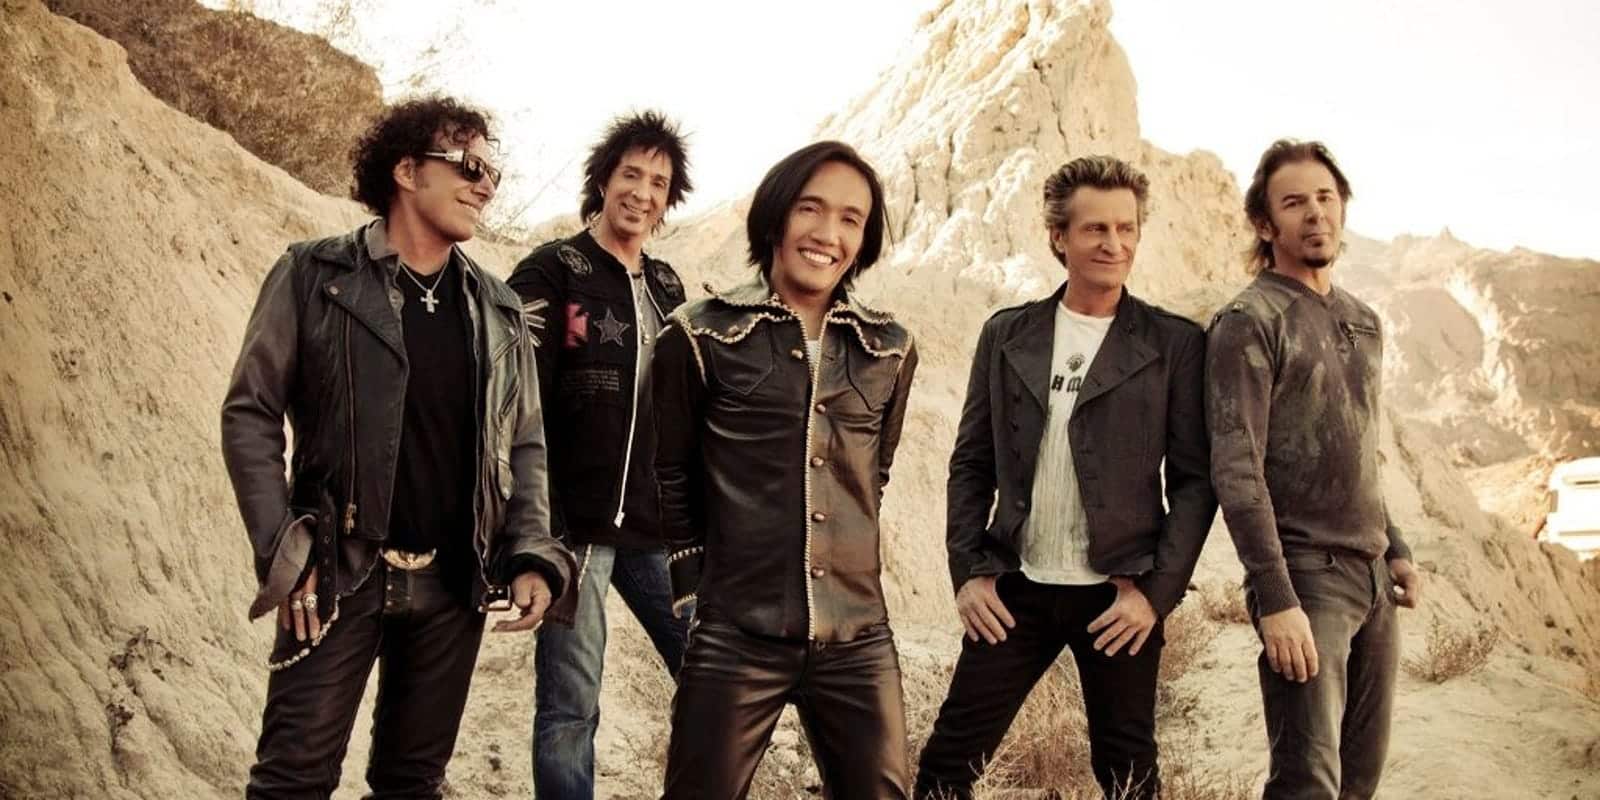 Journey & Toto at Thompson Boling Arena